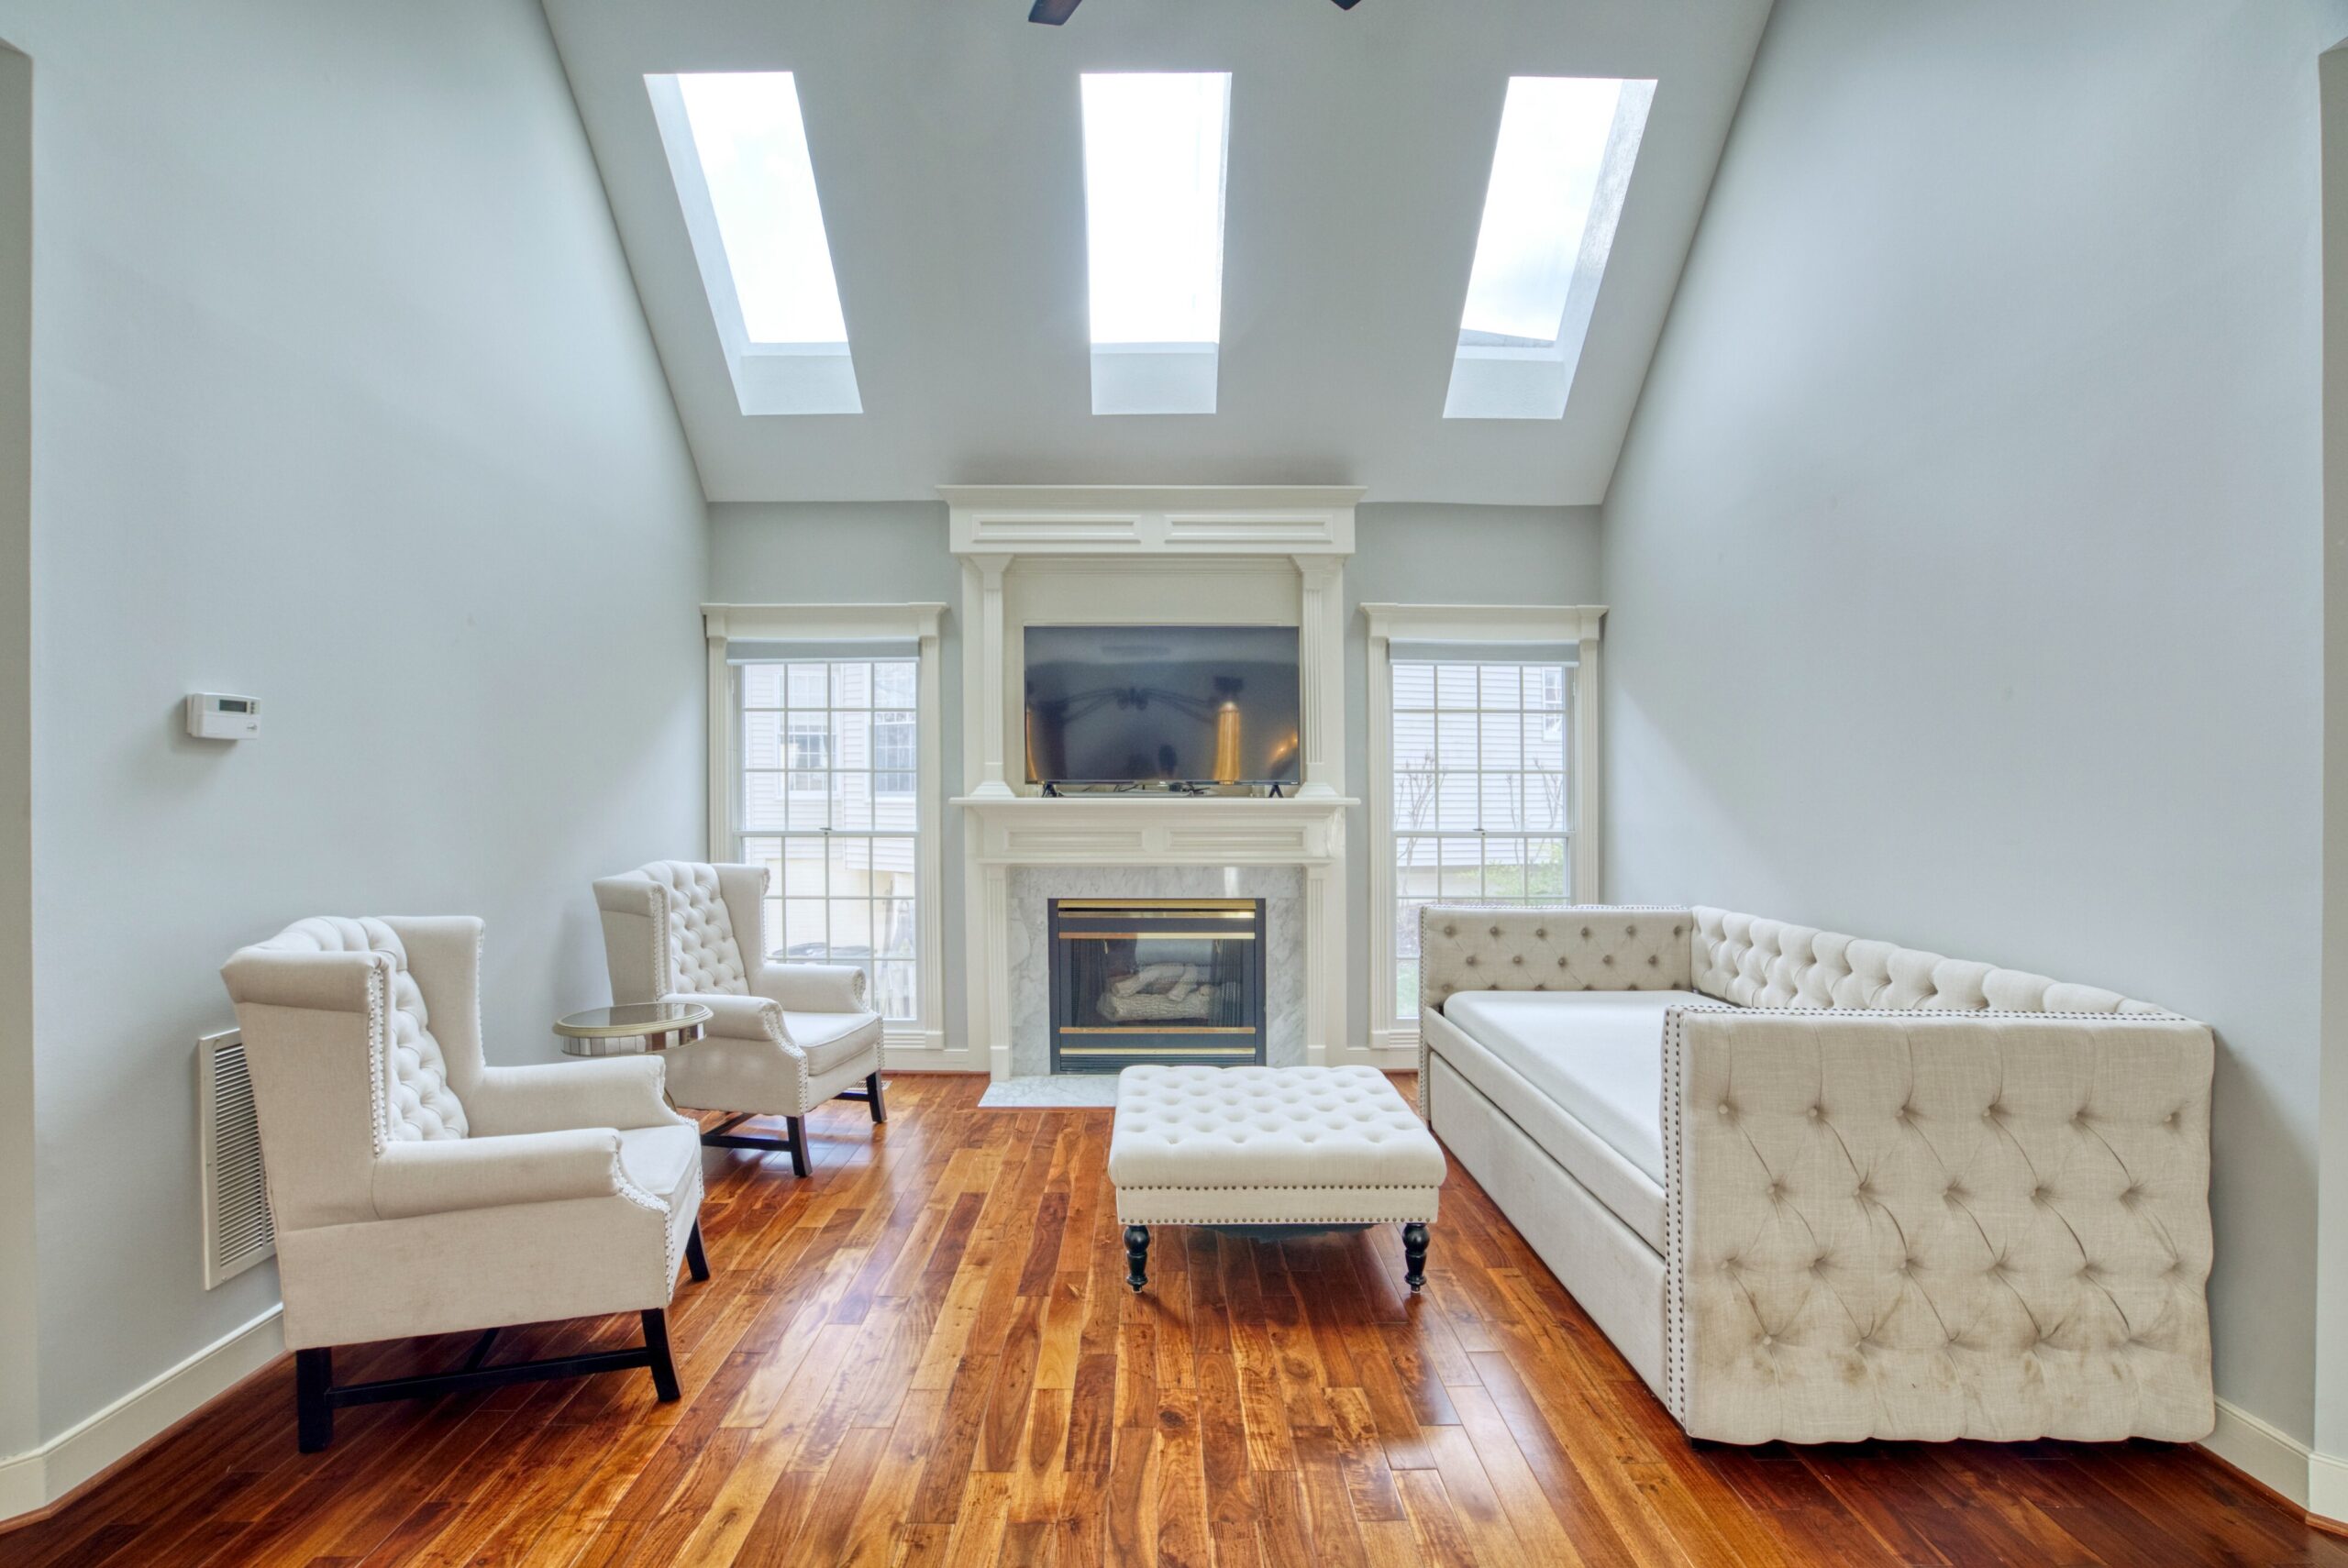 Interior professional photo of 21024 Starflower Way in Ashburn, VA - showing the sitting area in the main floor primary bedroom with vaulted ceiling, skylights, and fireplace